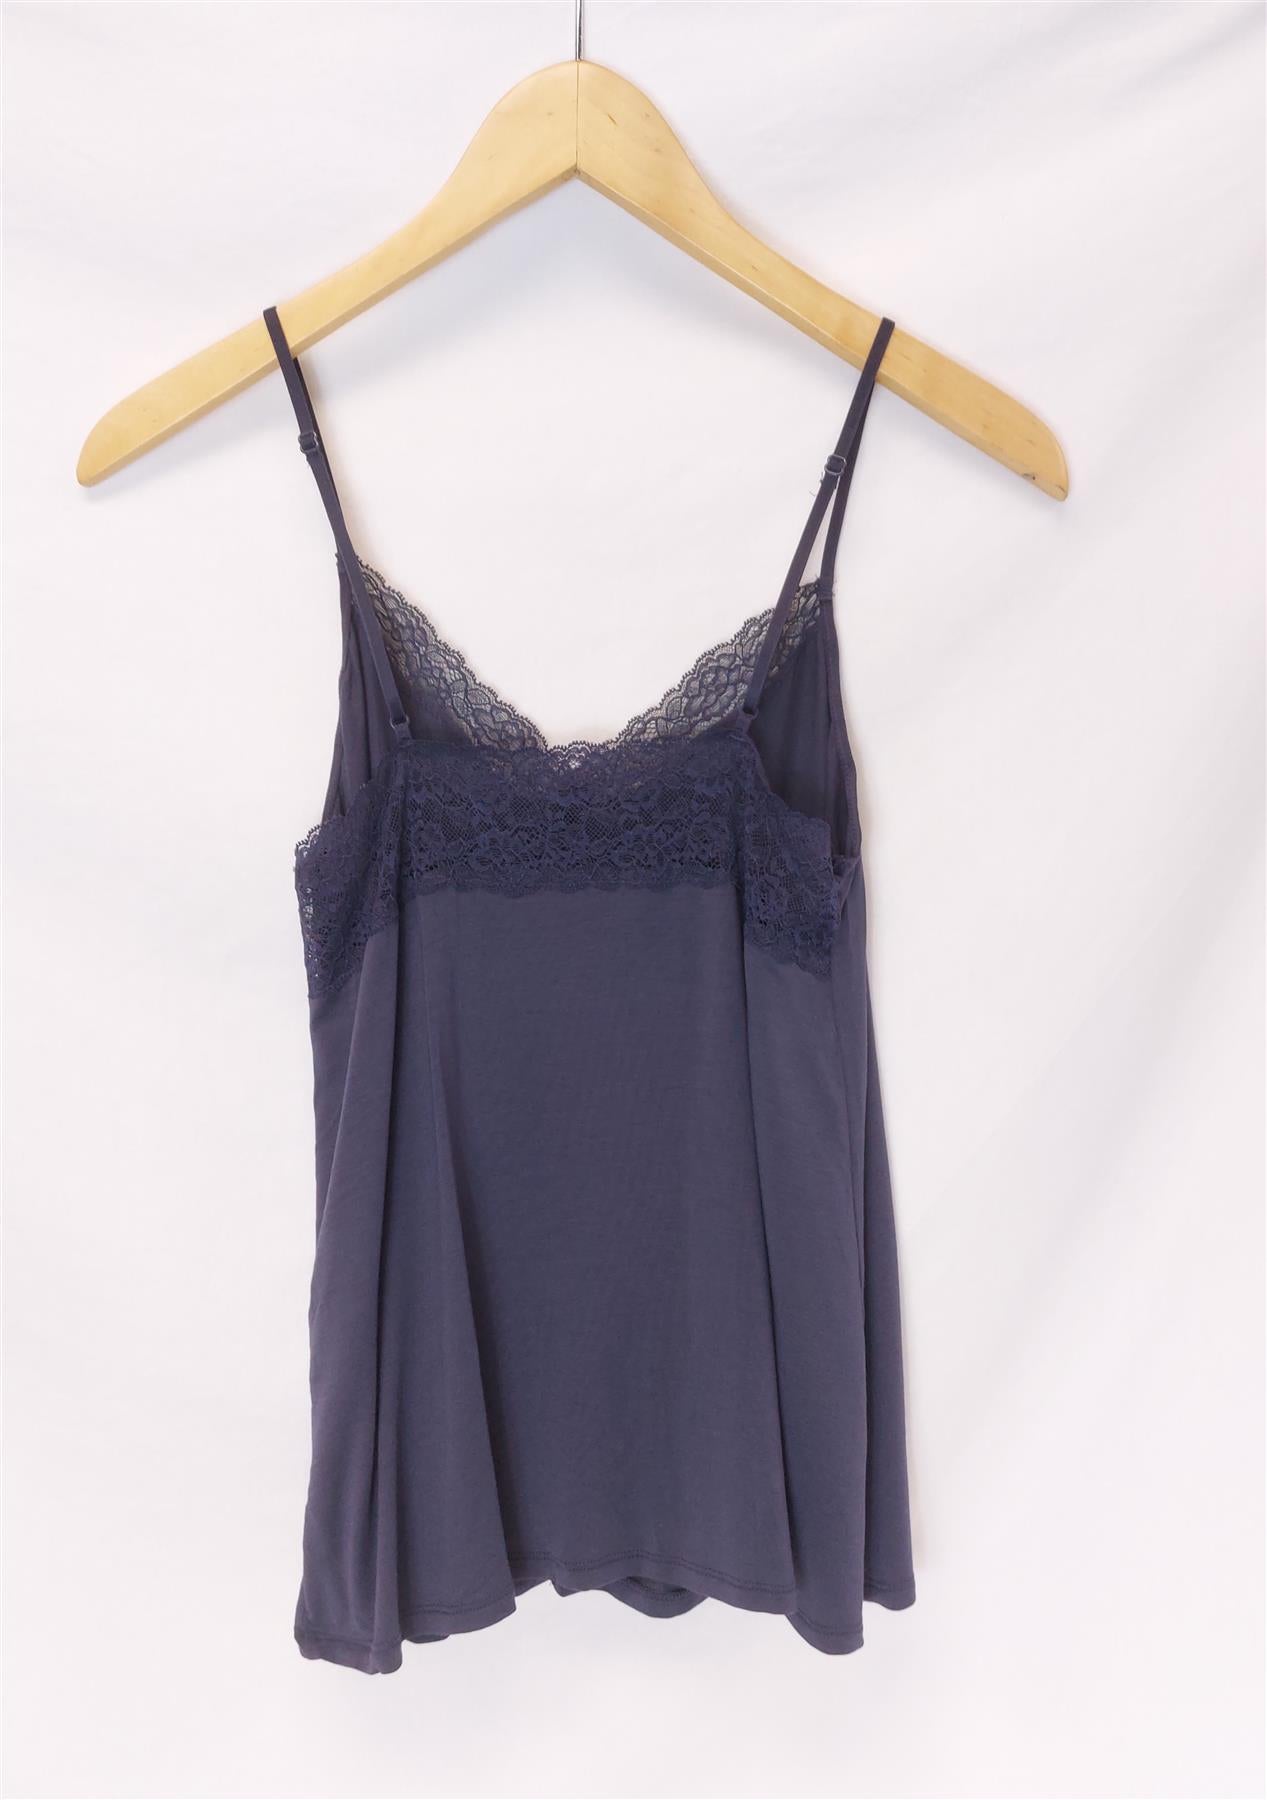 Women's Supersoft Lace Camisole Cami Top Button Detail Pyjama Top Navy S (8-10)